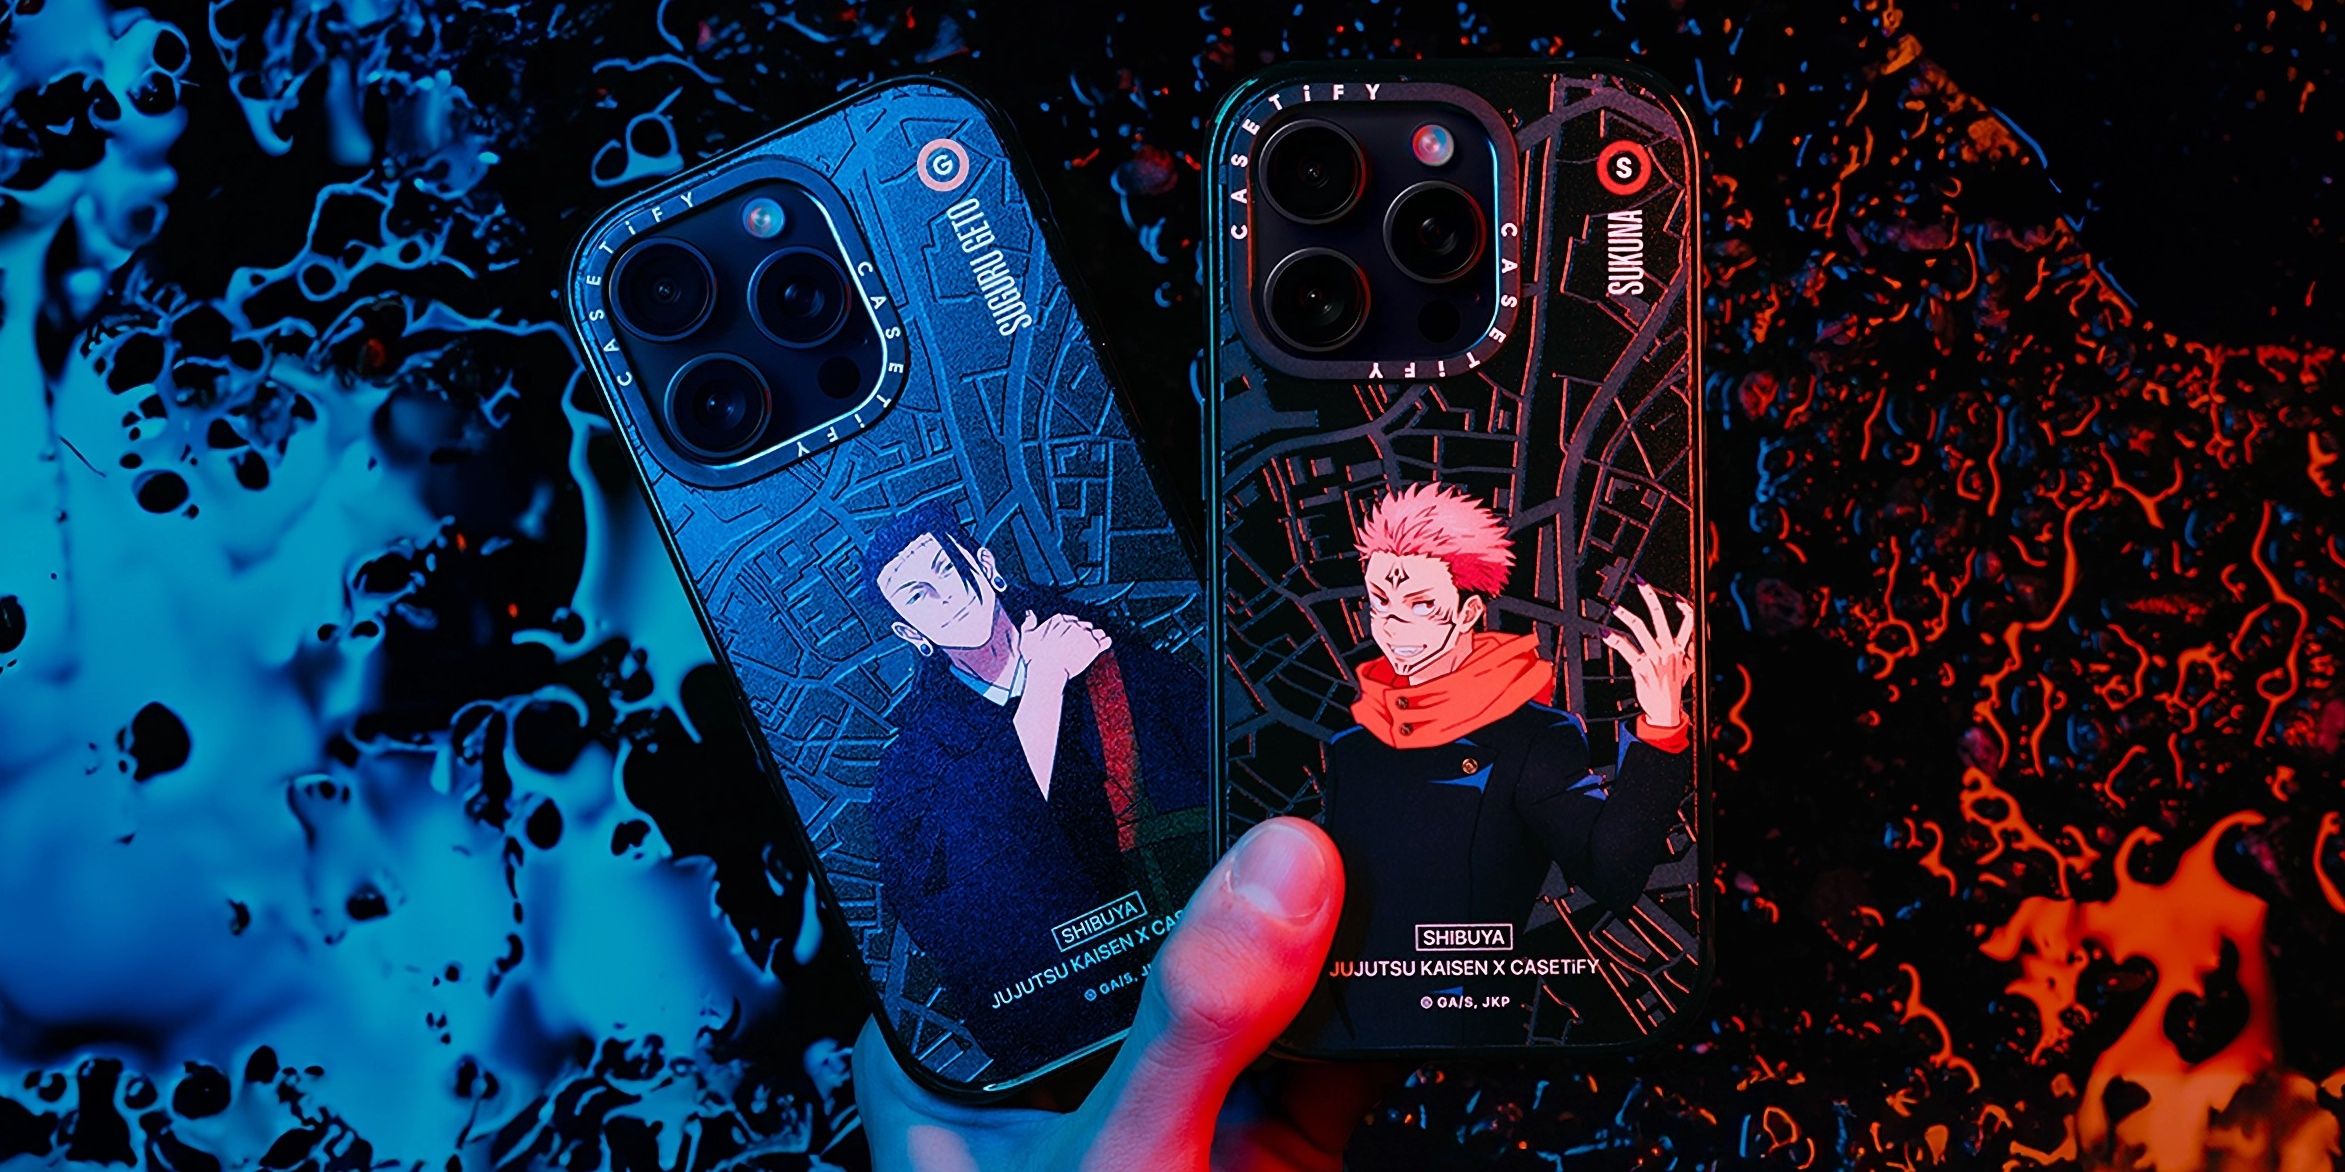 Phone cases from the Jujutsu Kaisen x CASETiFY collection featuring Sukuna and Geto